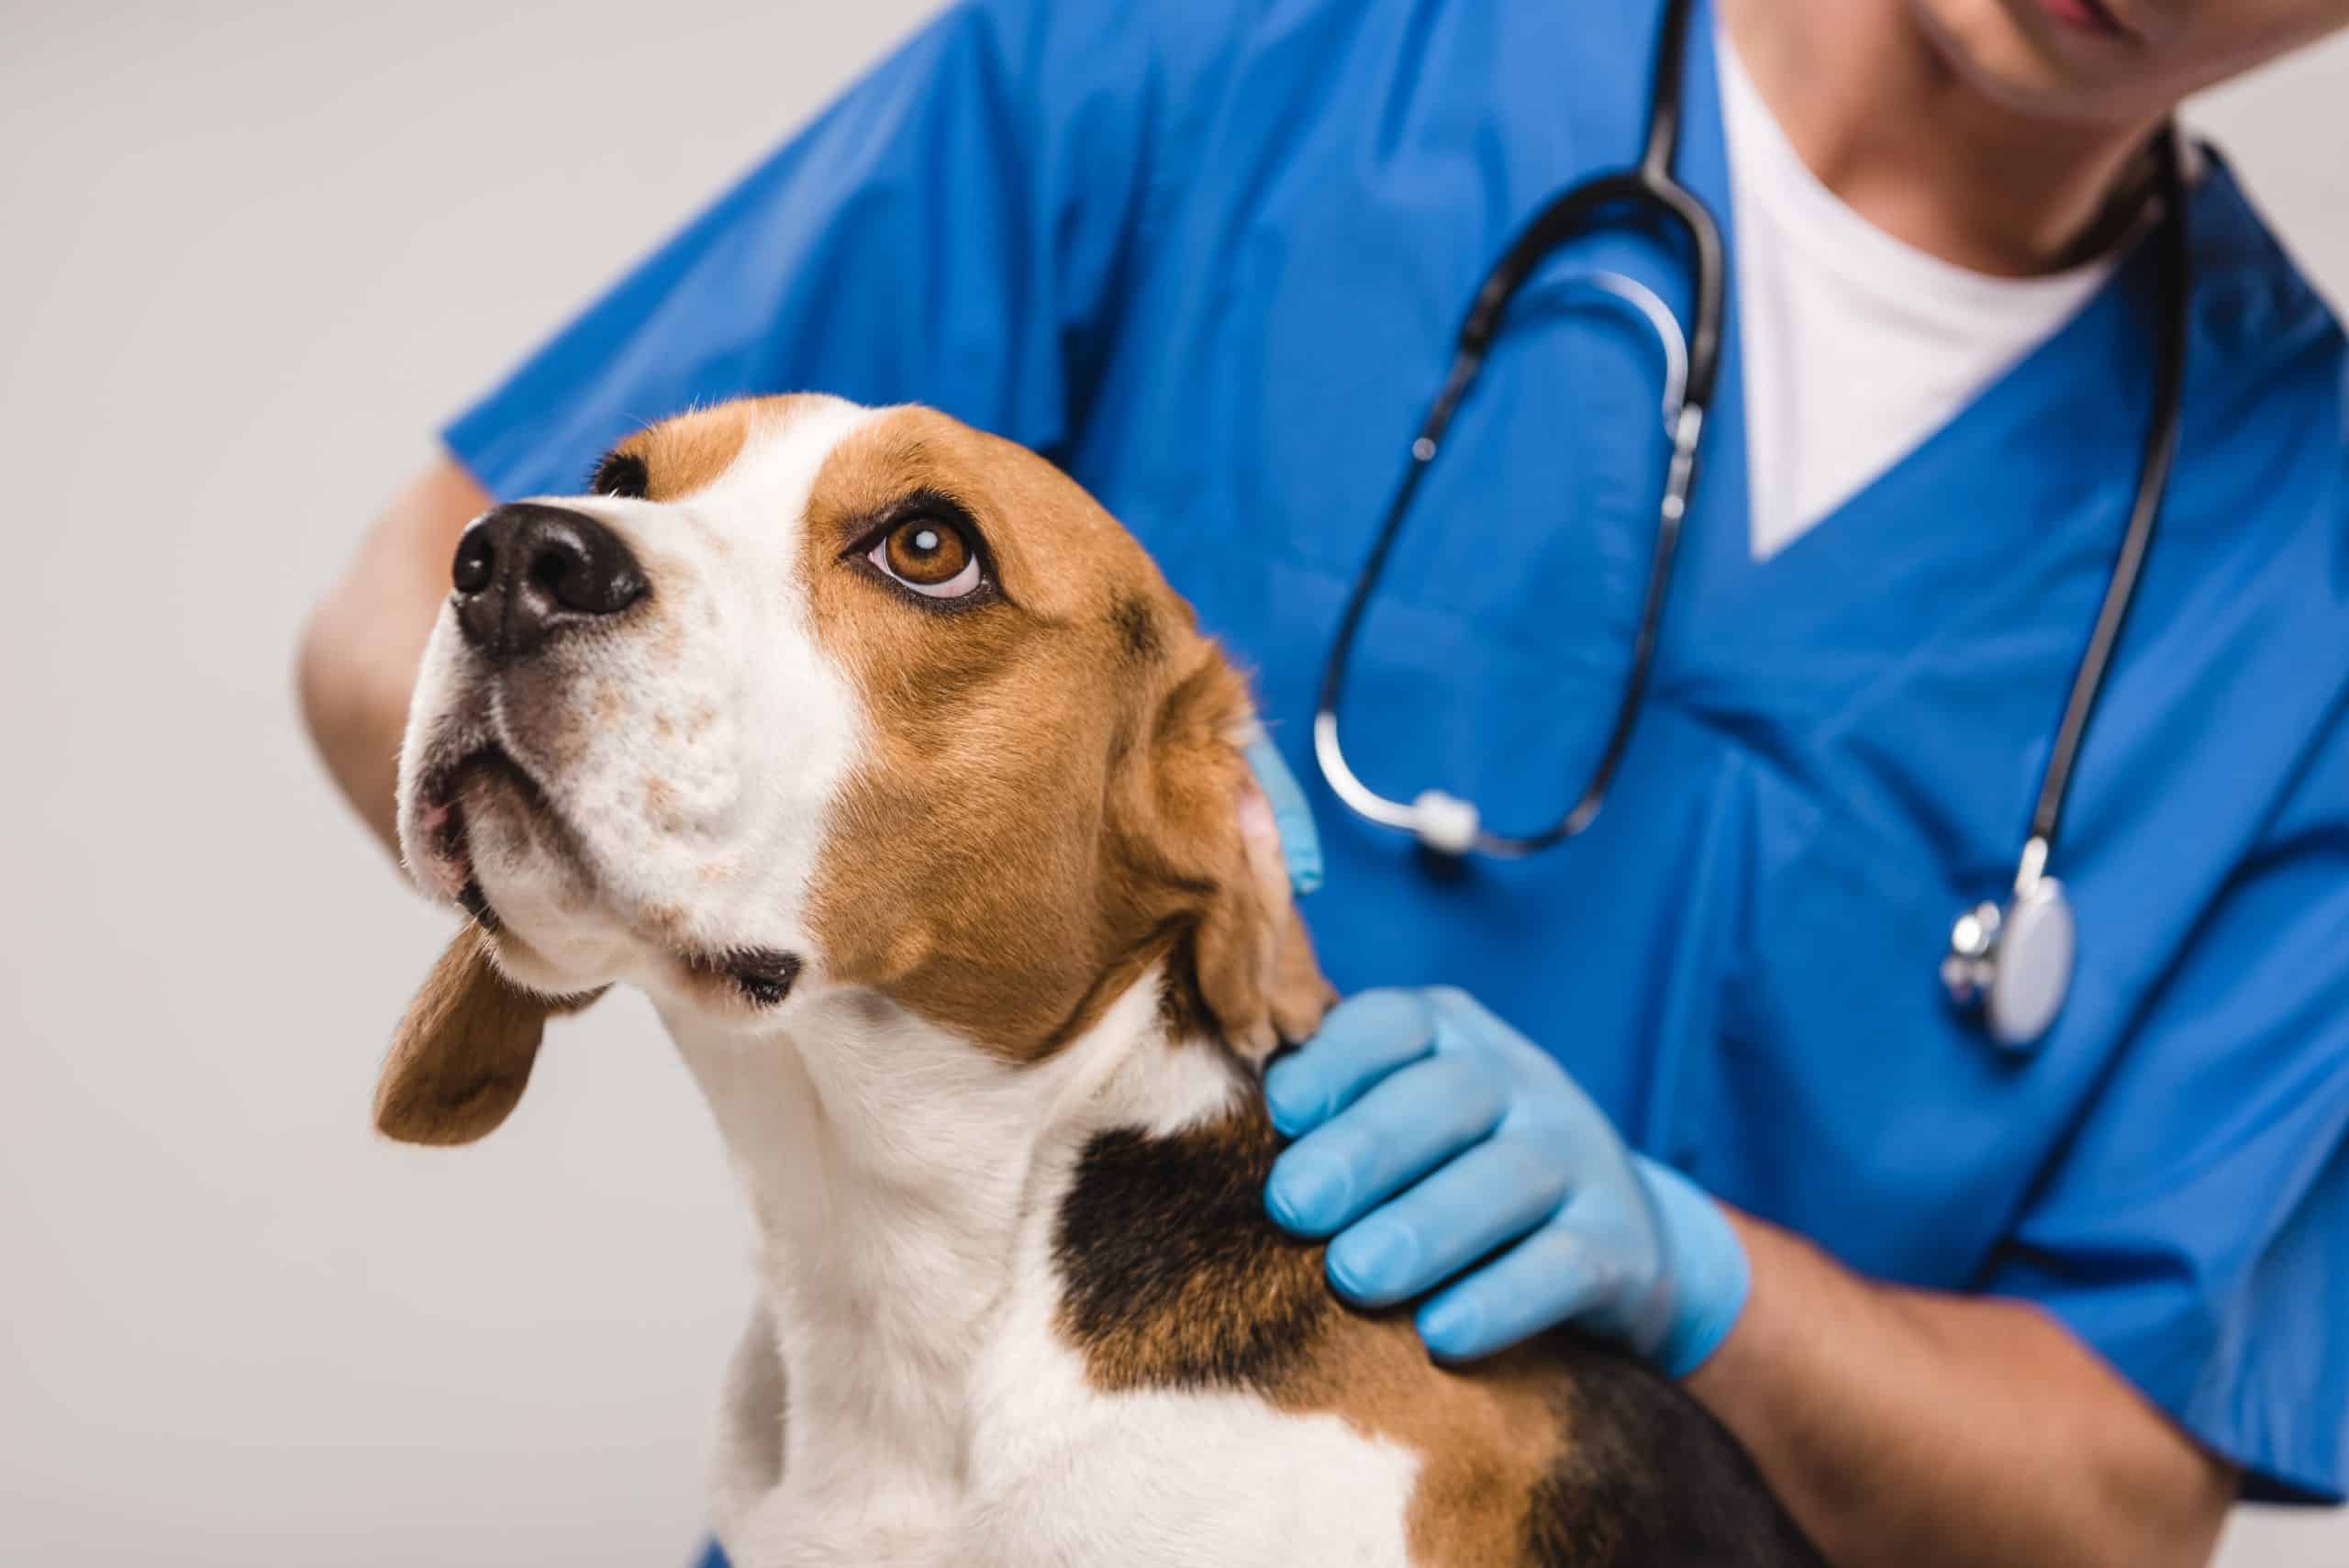 Veterinary Practice of animal healthcare research